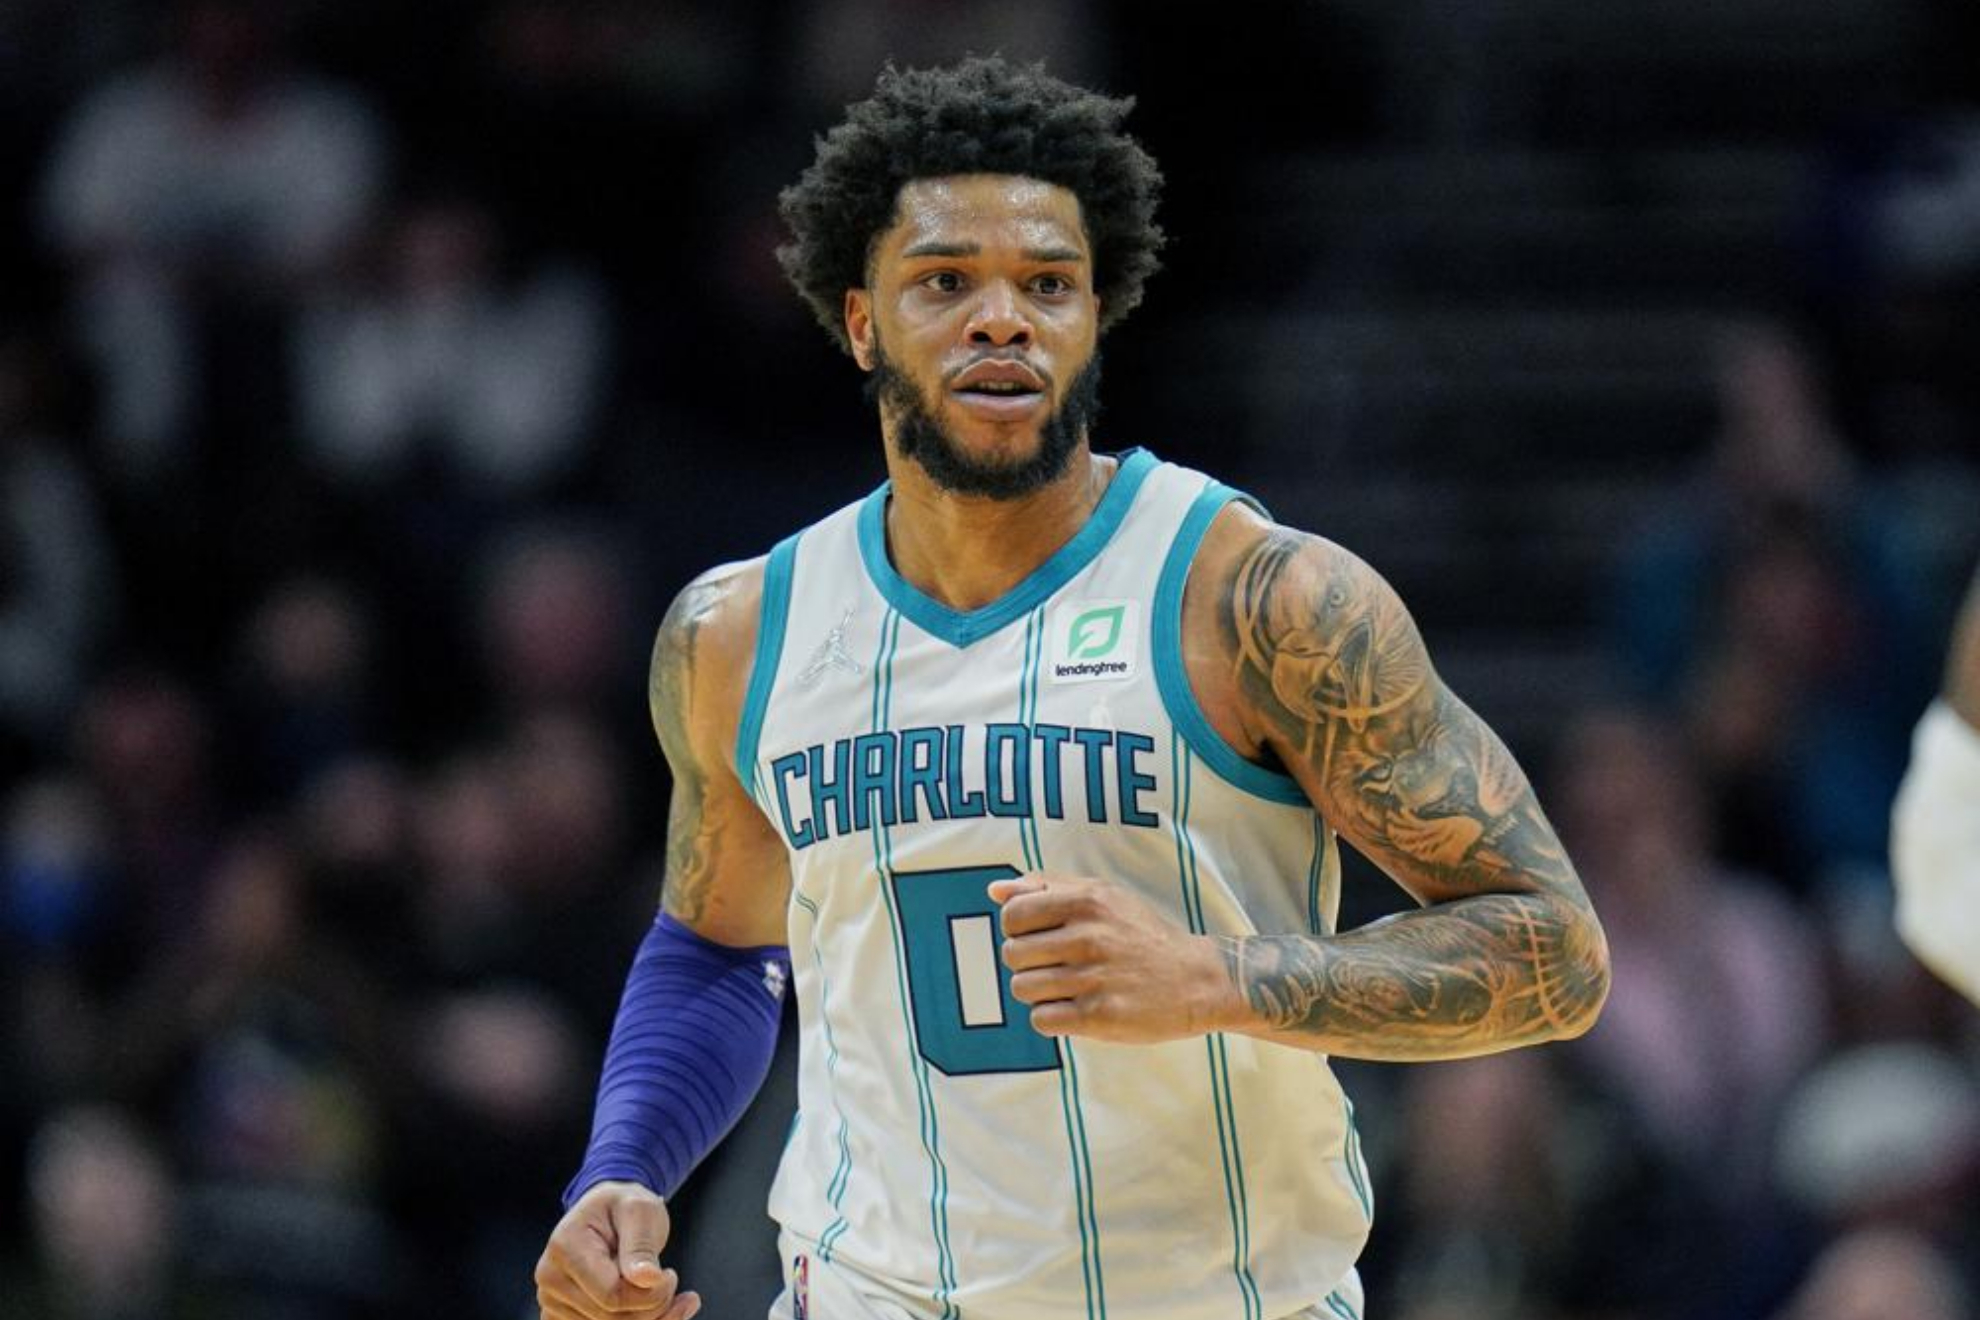 Miles Bridges playing in the NBA for the Charlotte Hornets.